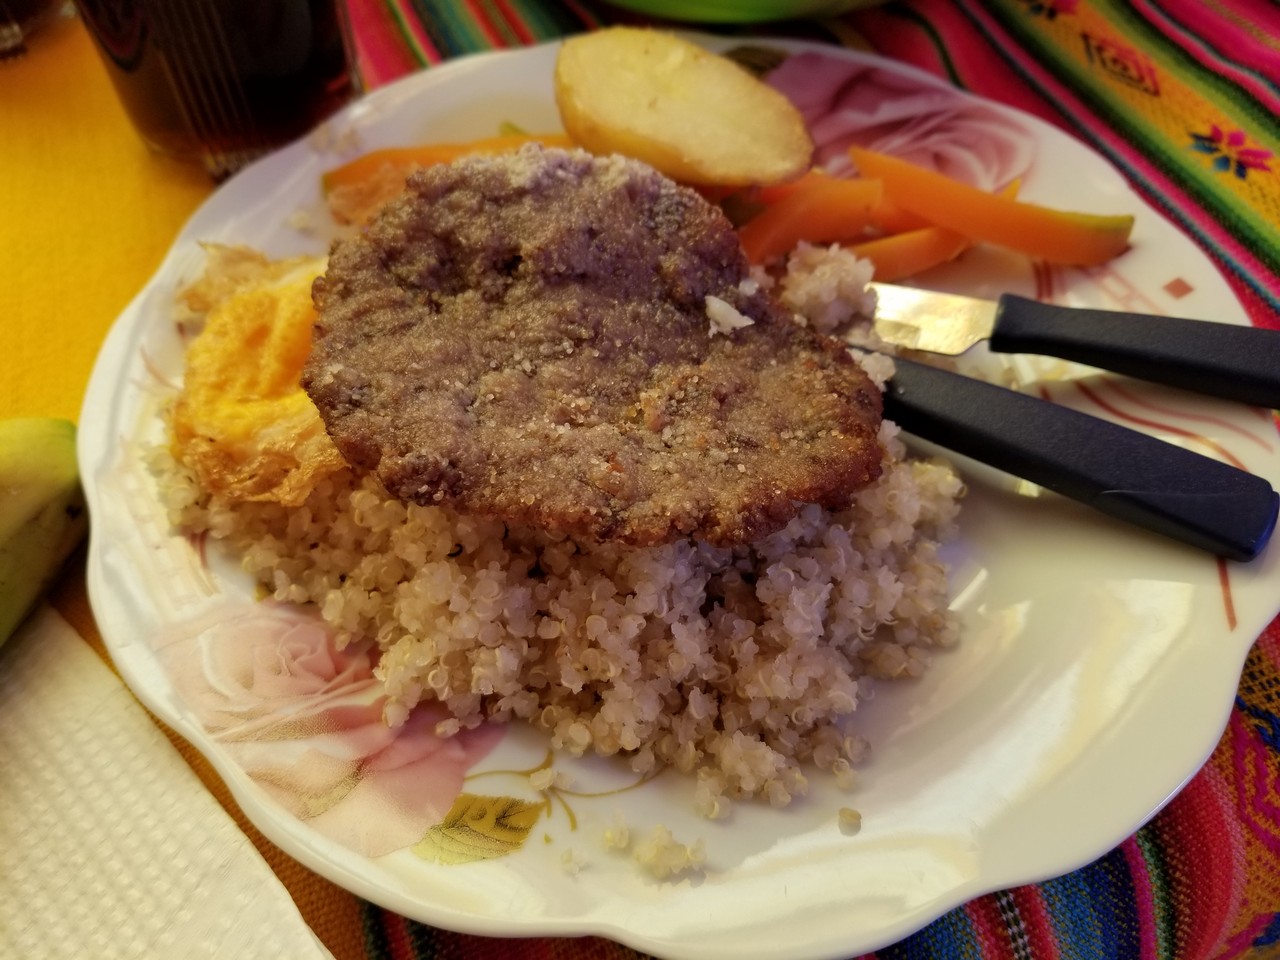 a plate of food with a fork and knife